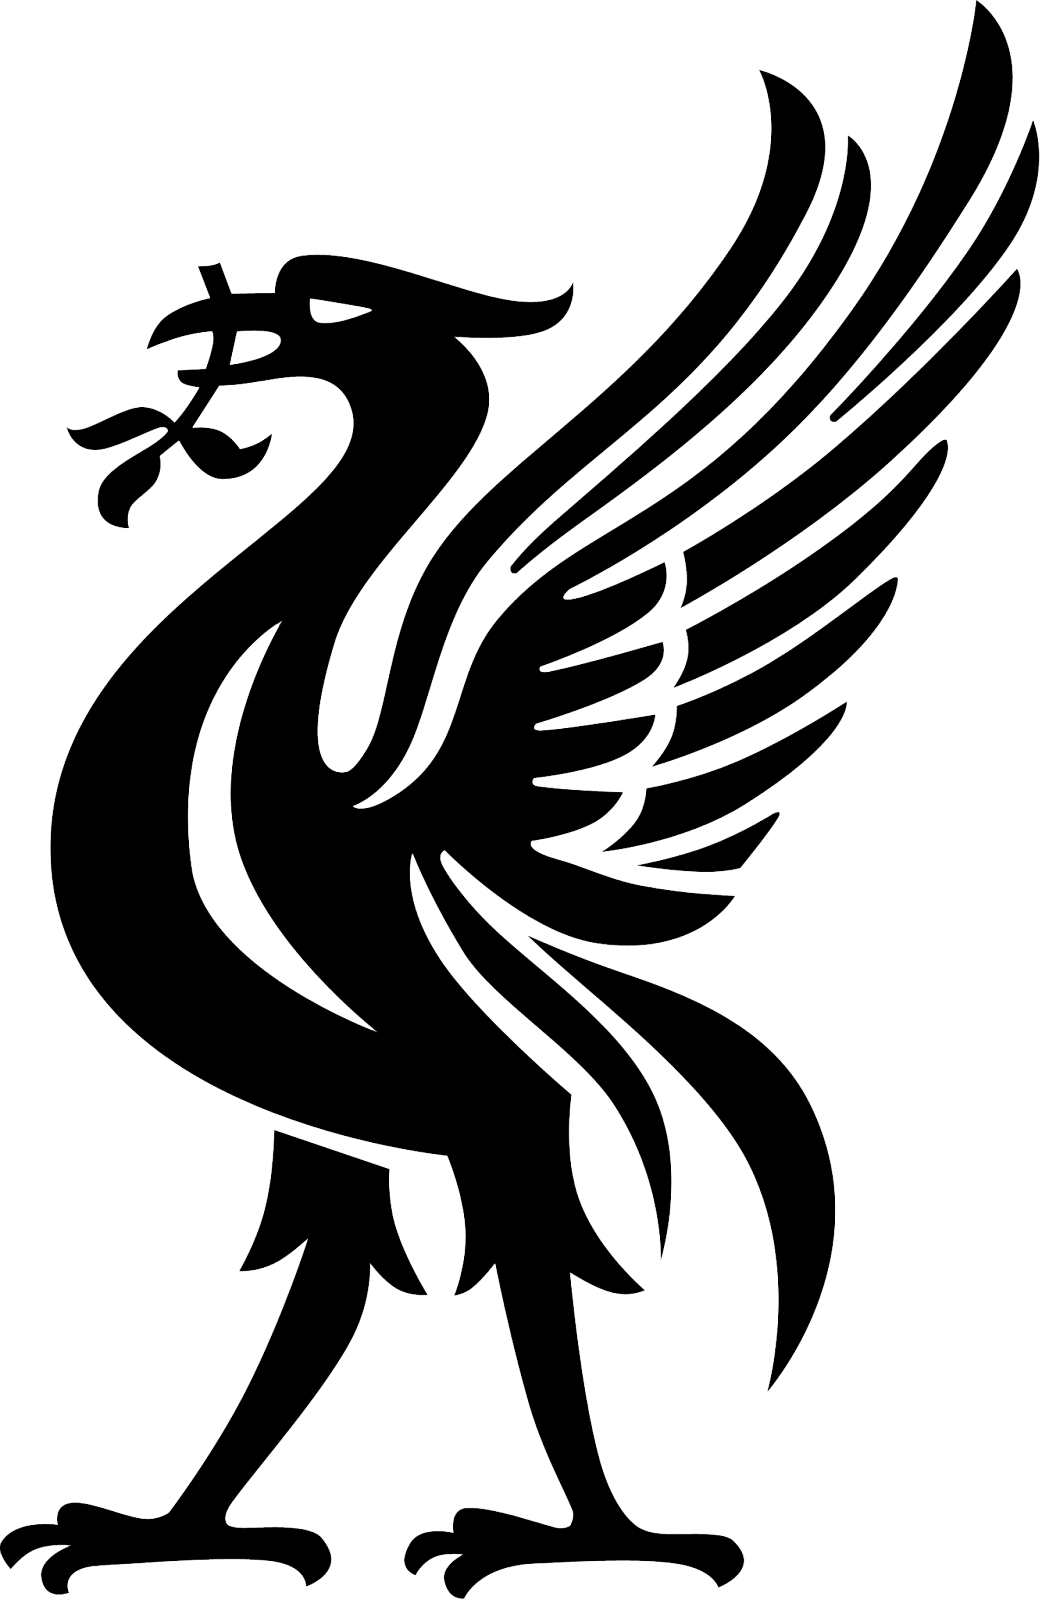 Liverpool PNG - 105735